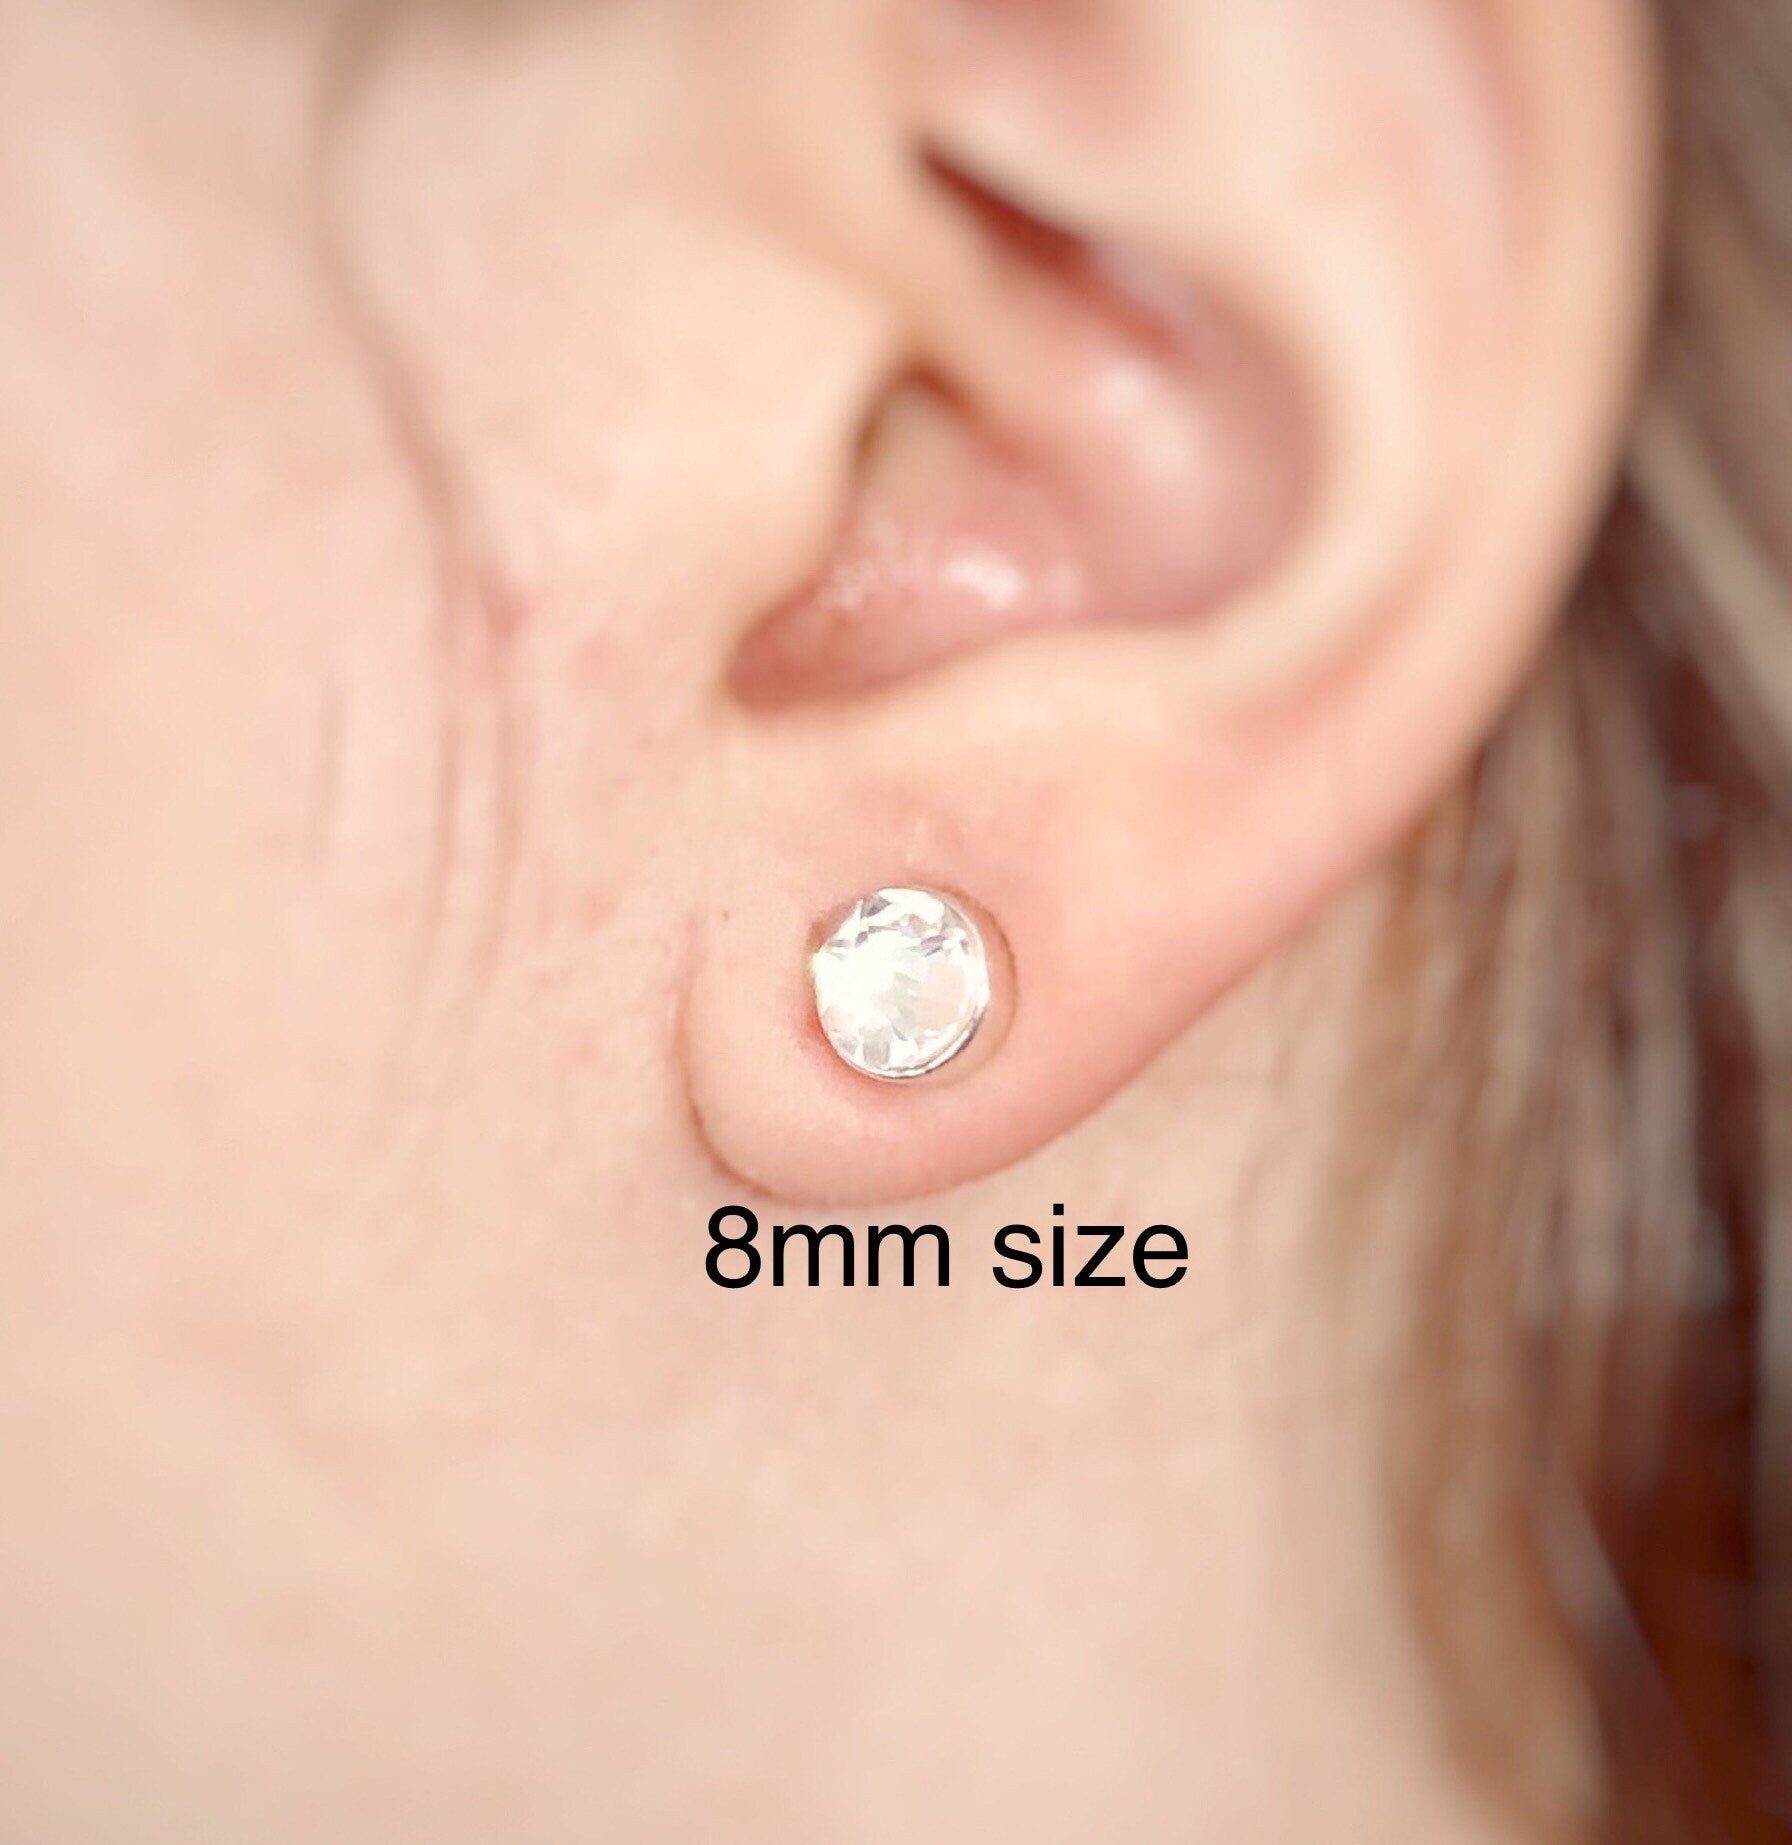 Keloid Magnetic Earrings offers strong pressure on the ear lobes.